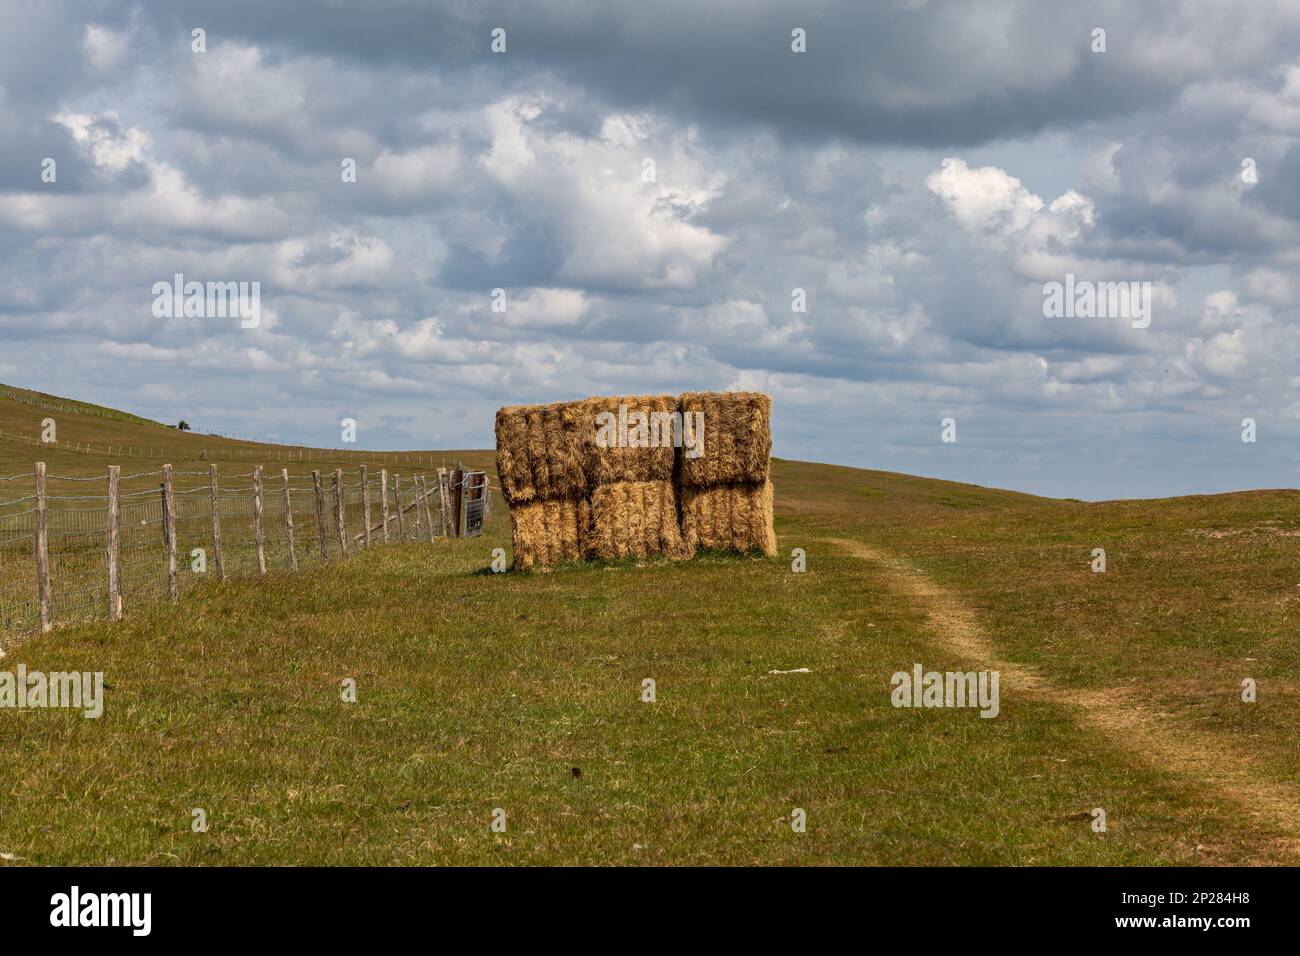 A haystack in the South Downs, near Firle Beacon Stock Photo